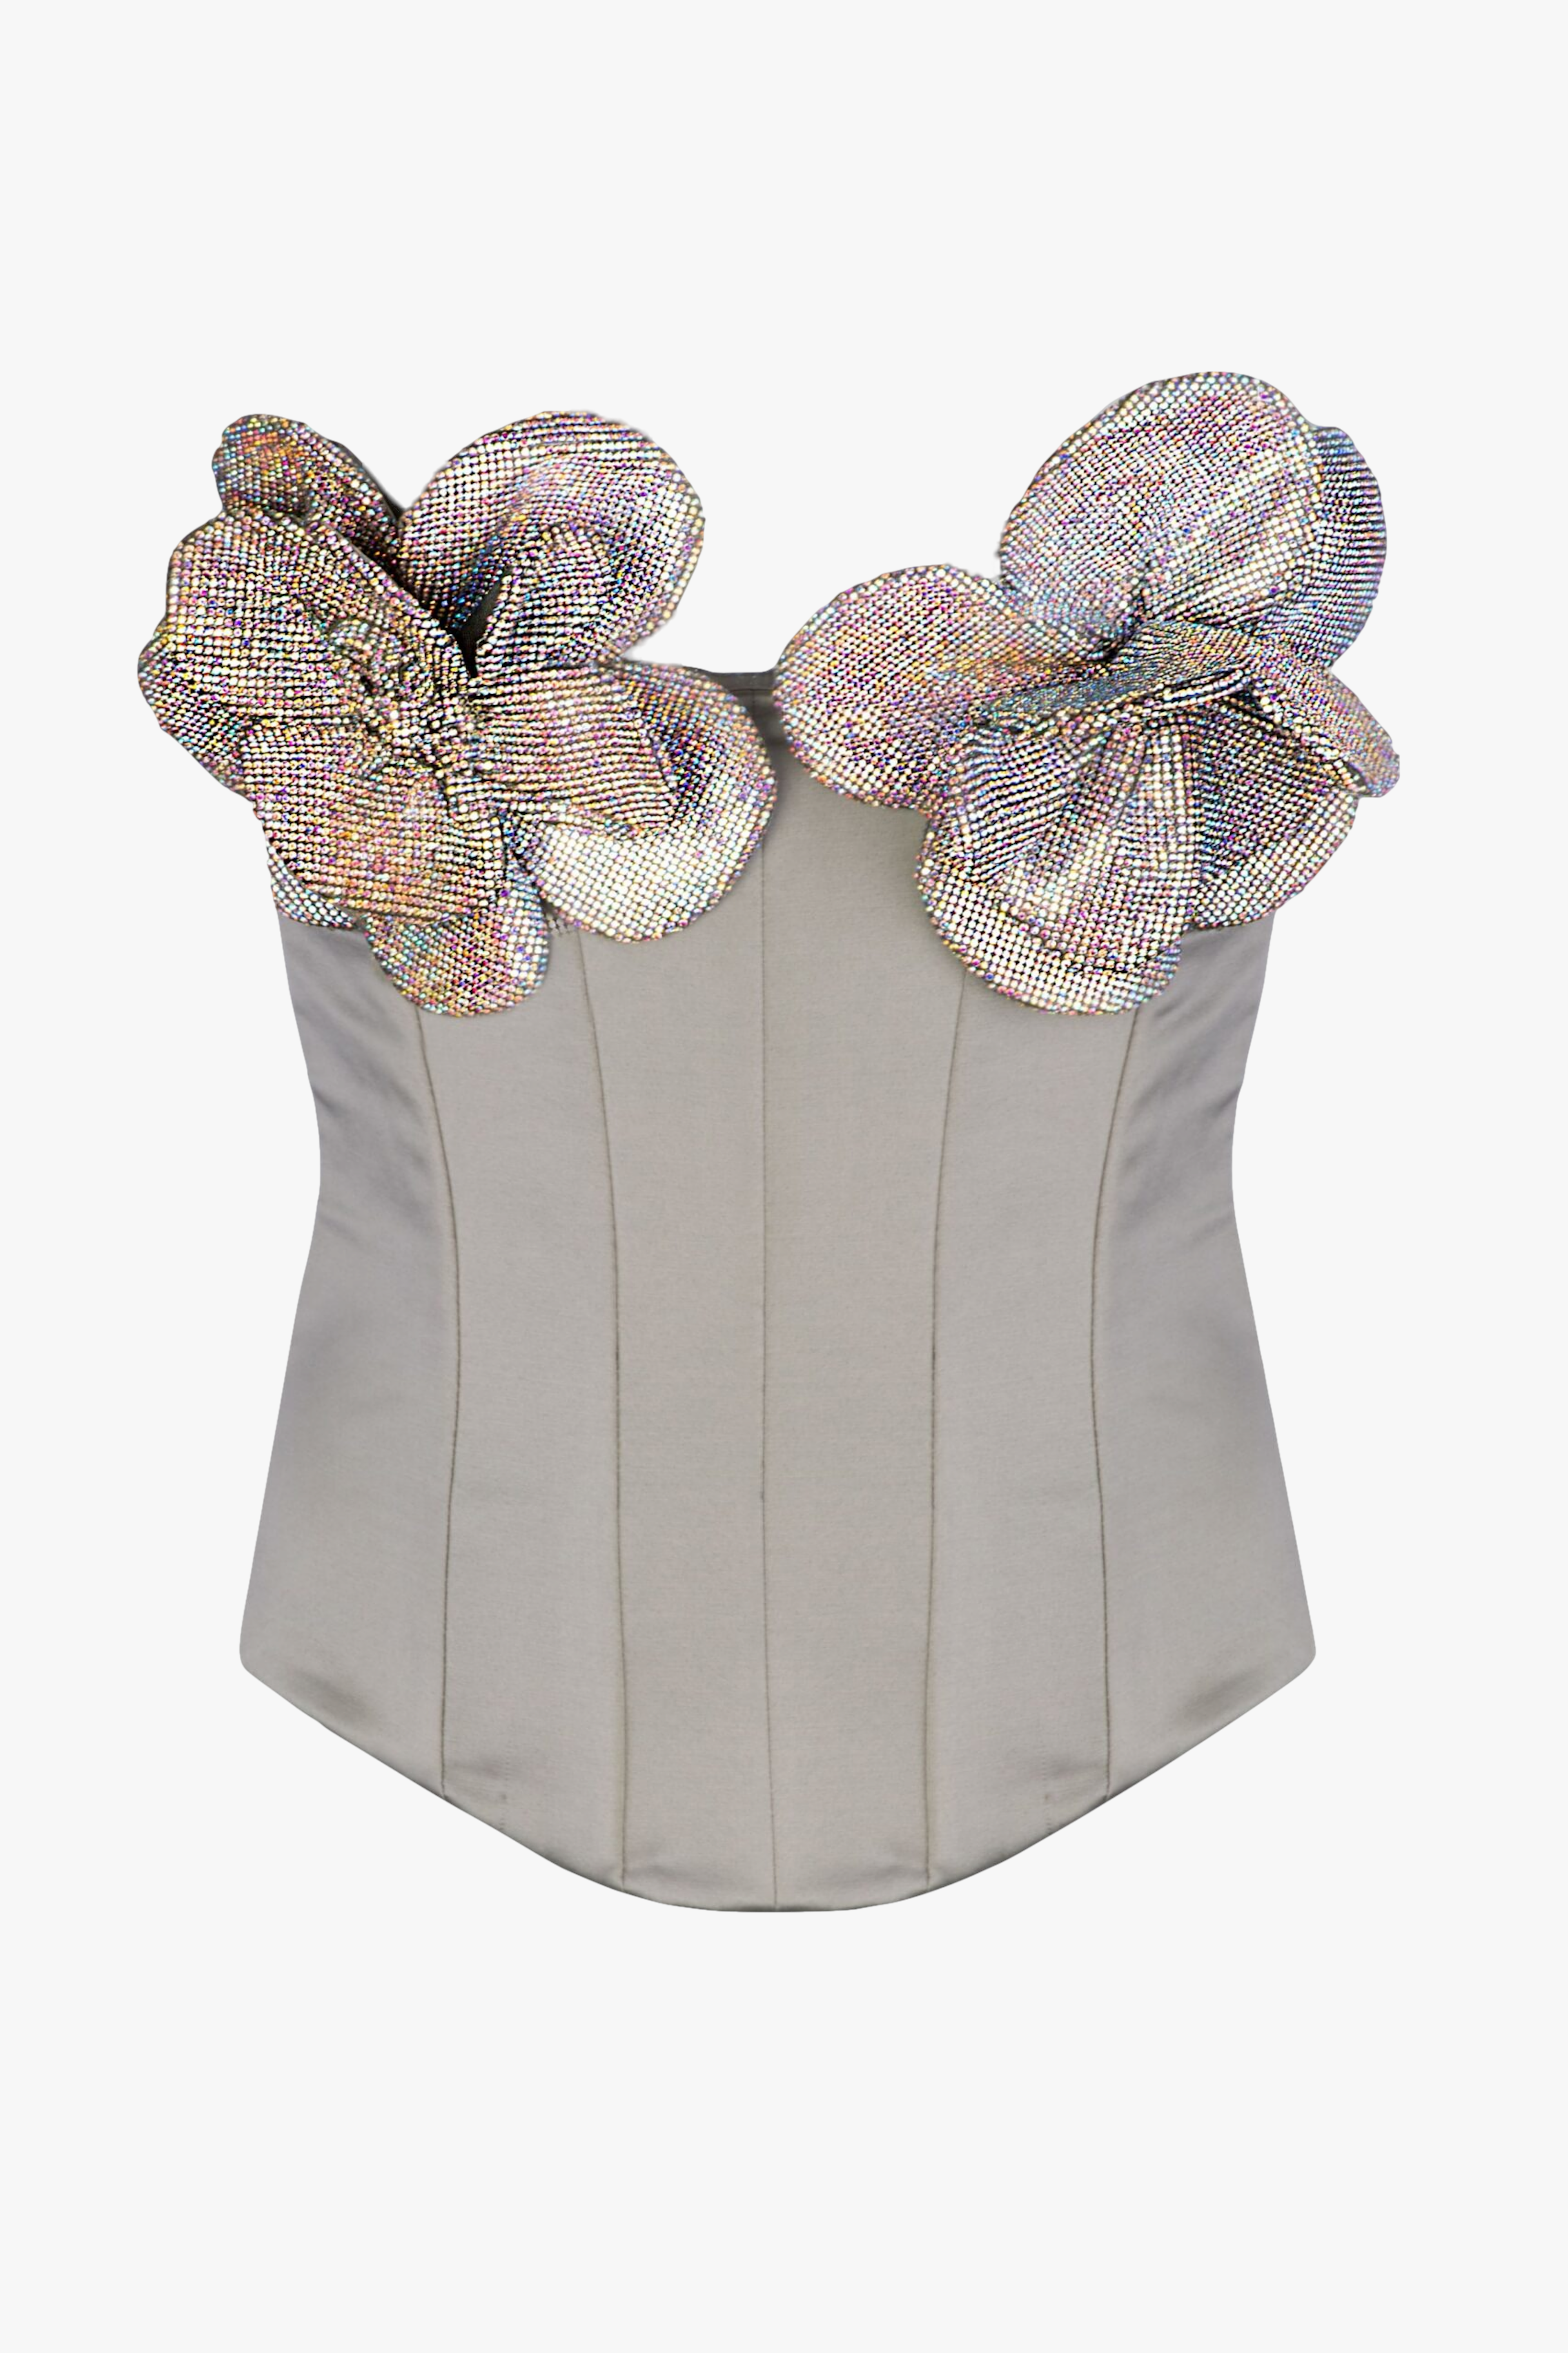 Shop Beige Corset with Flowers from Santa Brands at Seezona